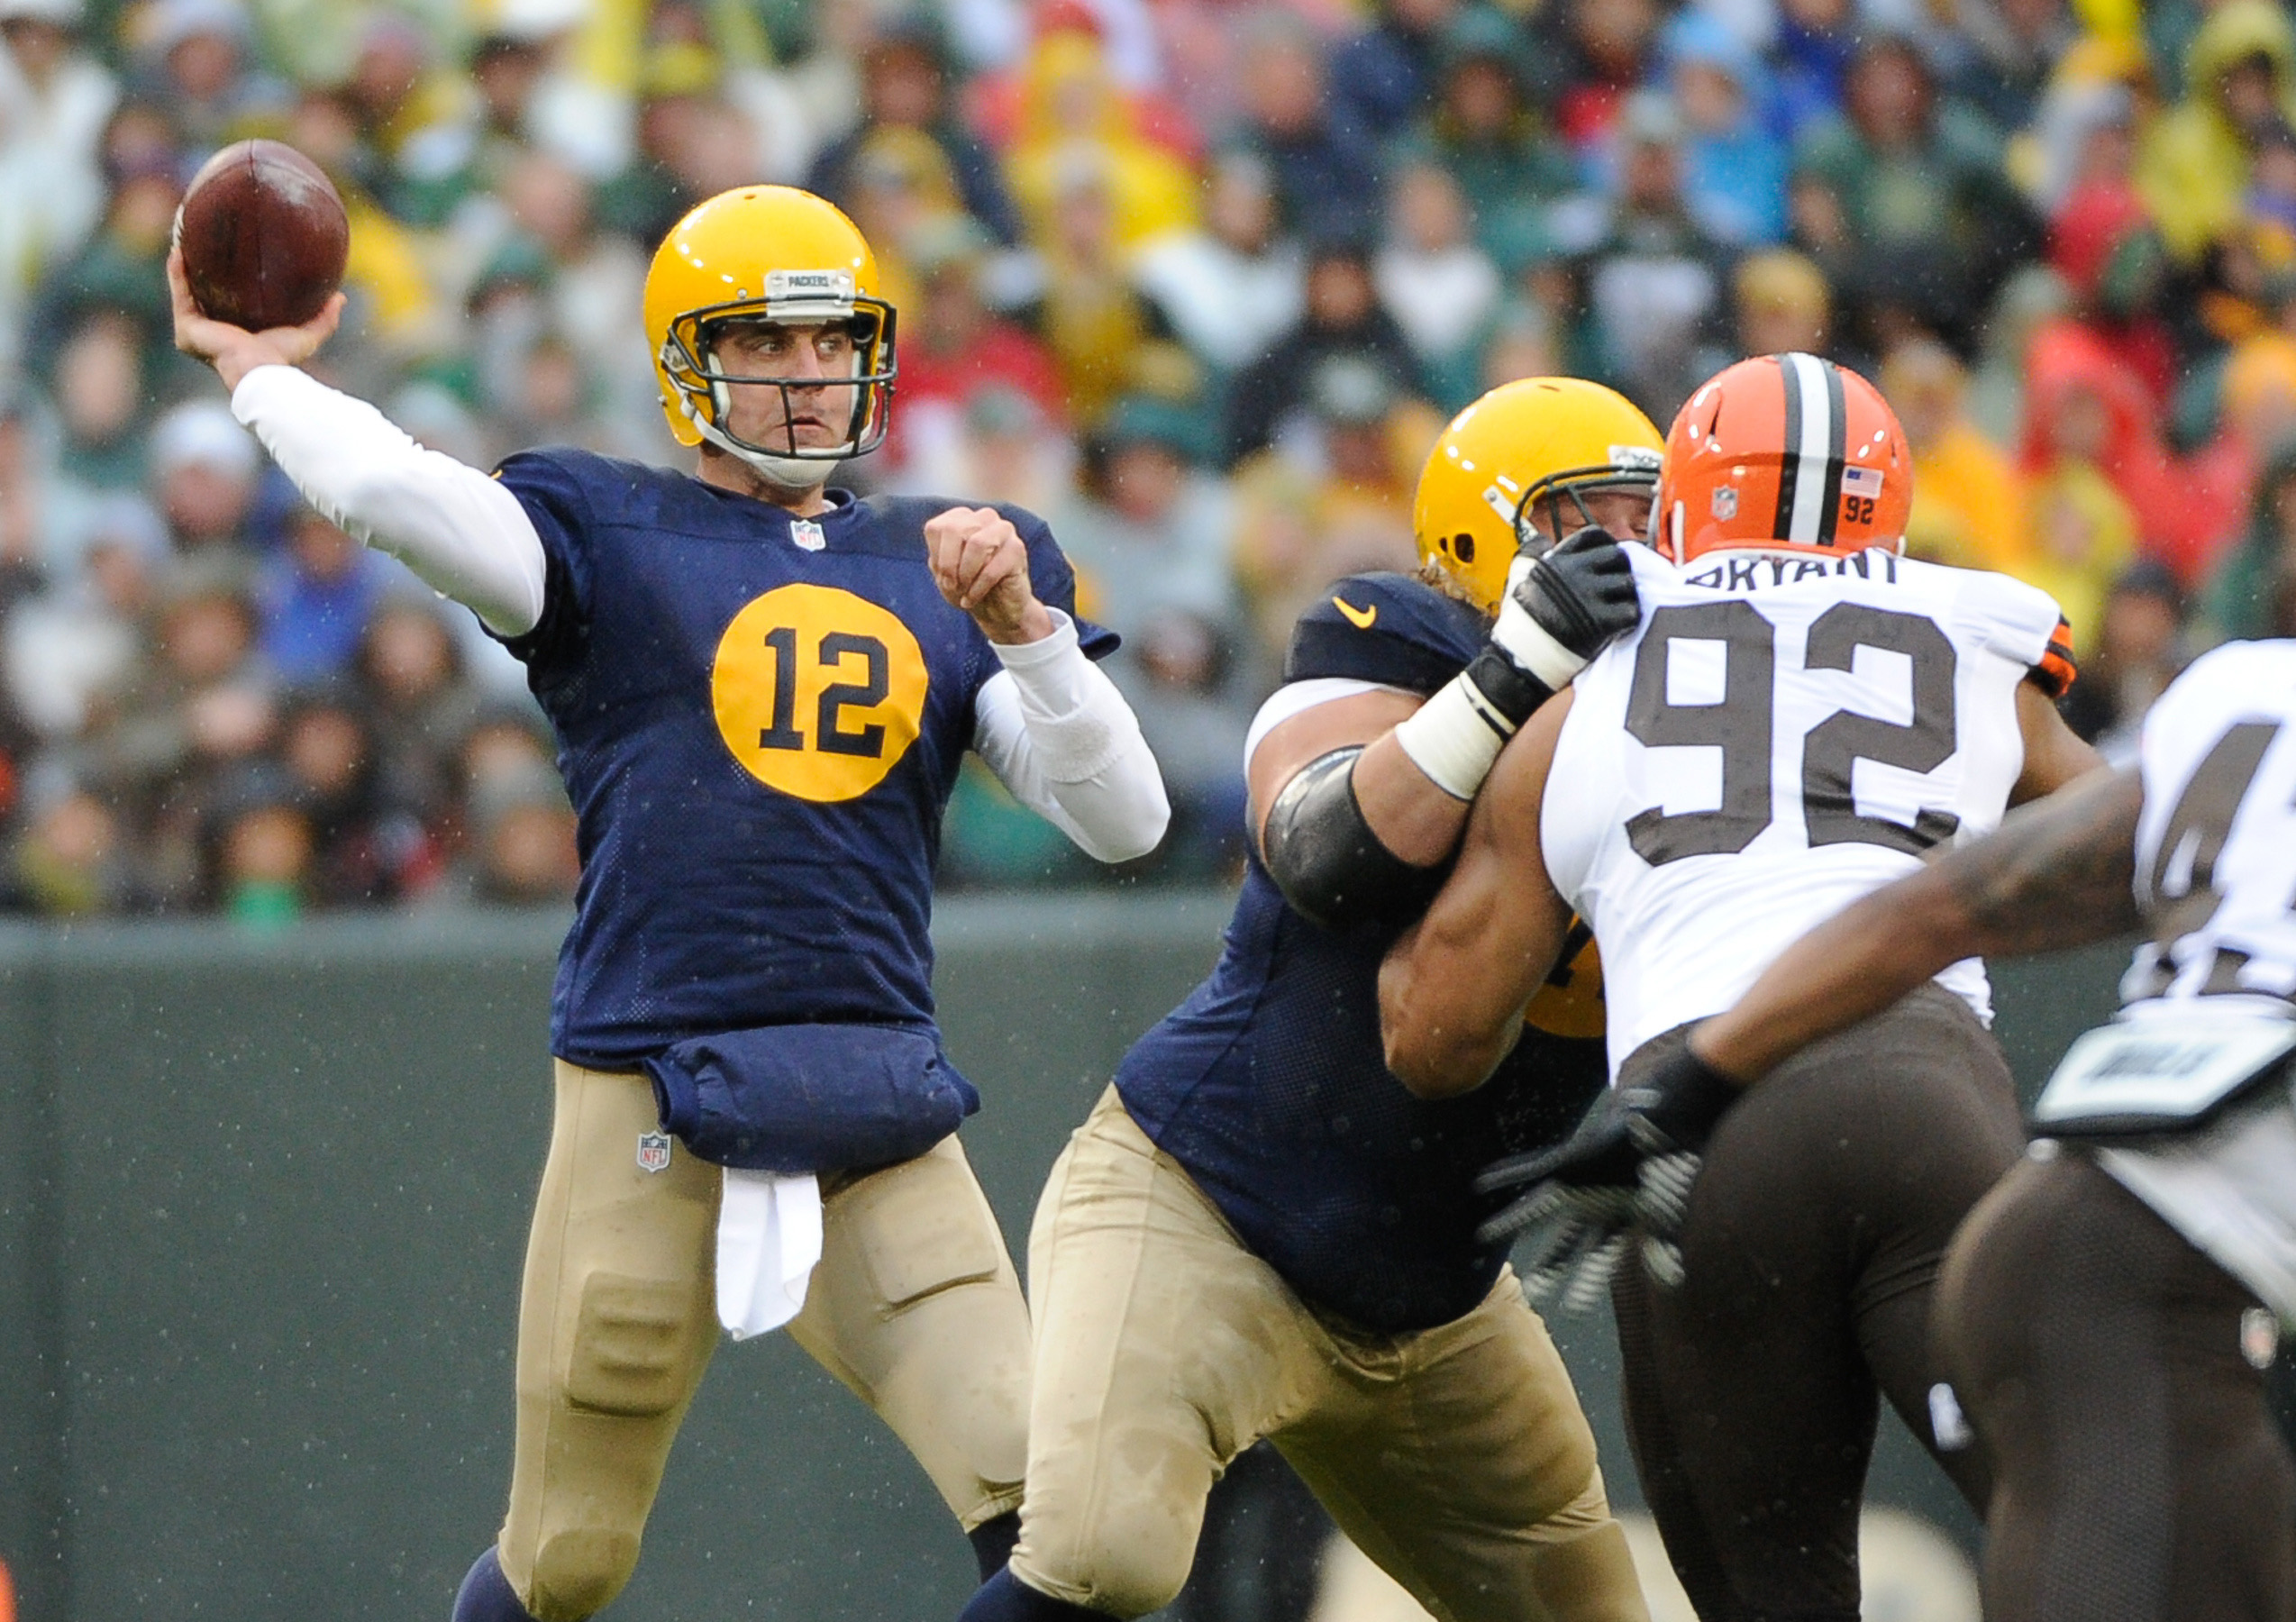 The Green Bay Packers are wearing 'new' throwbacks that look like Michigan  jerseys